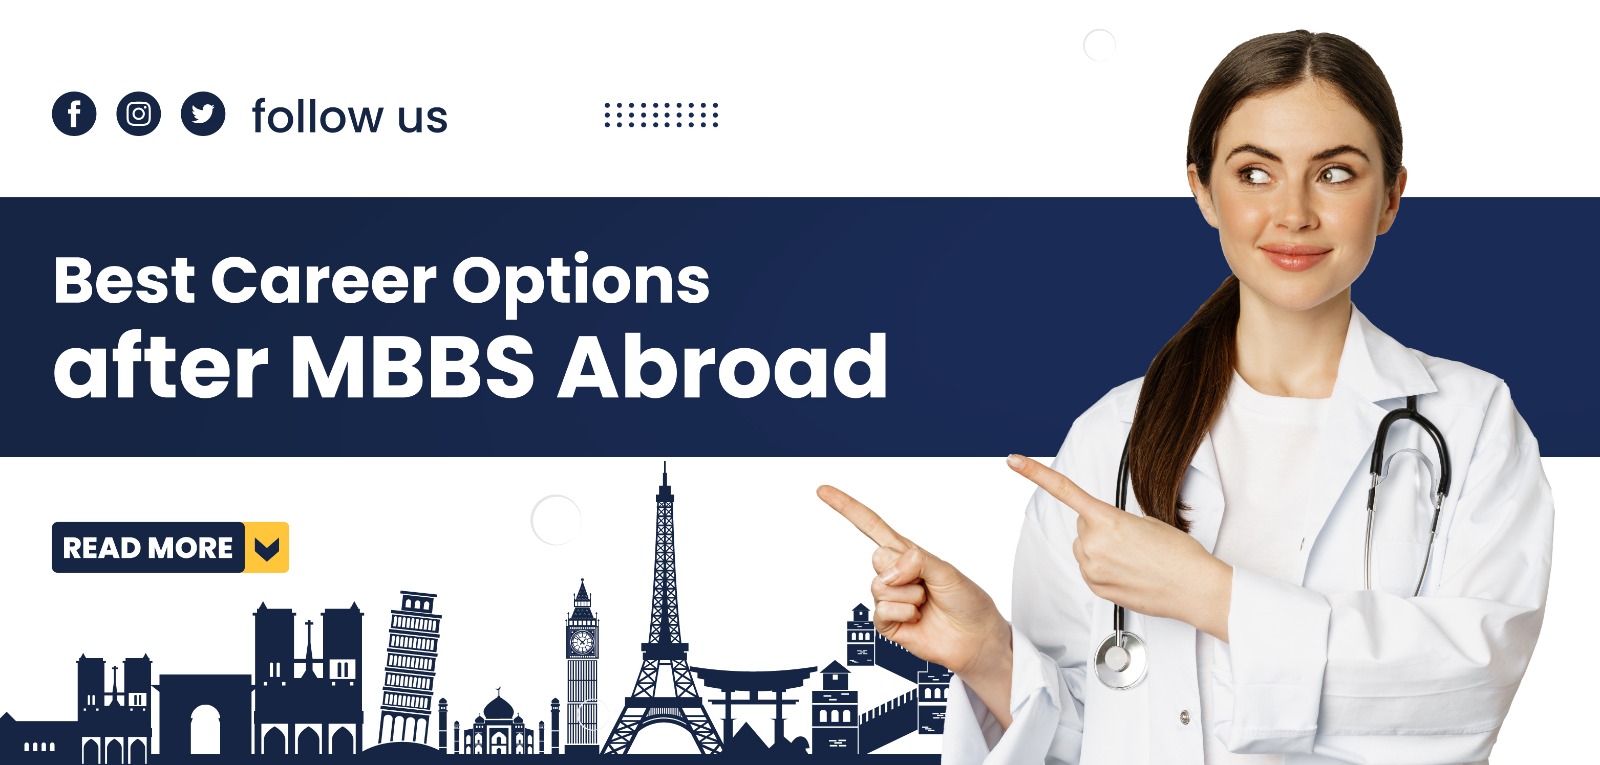 Best Career Options after MBBS Abroad